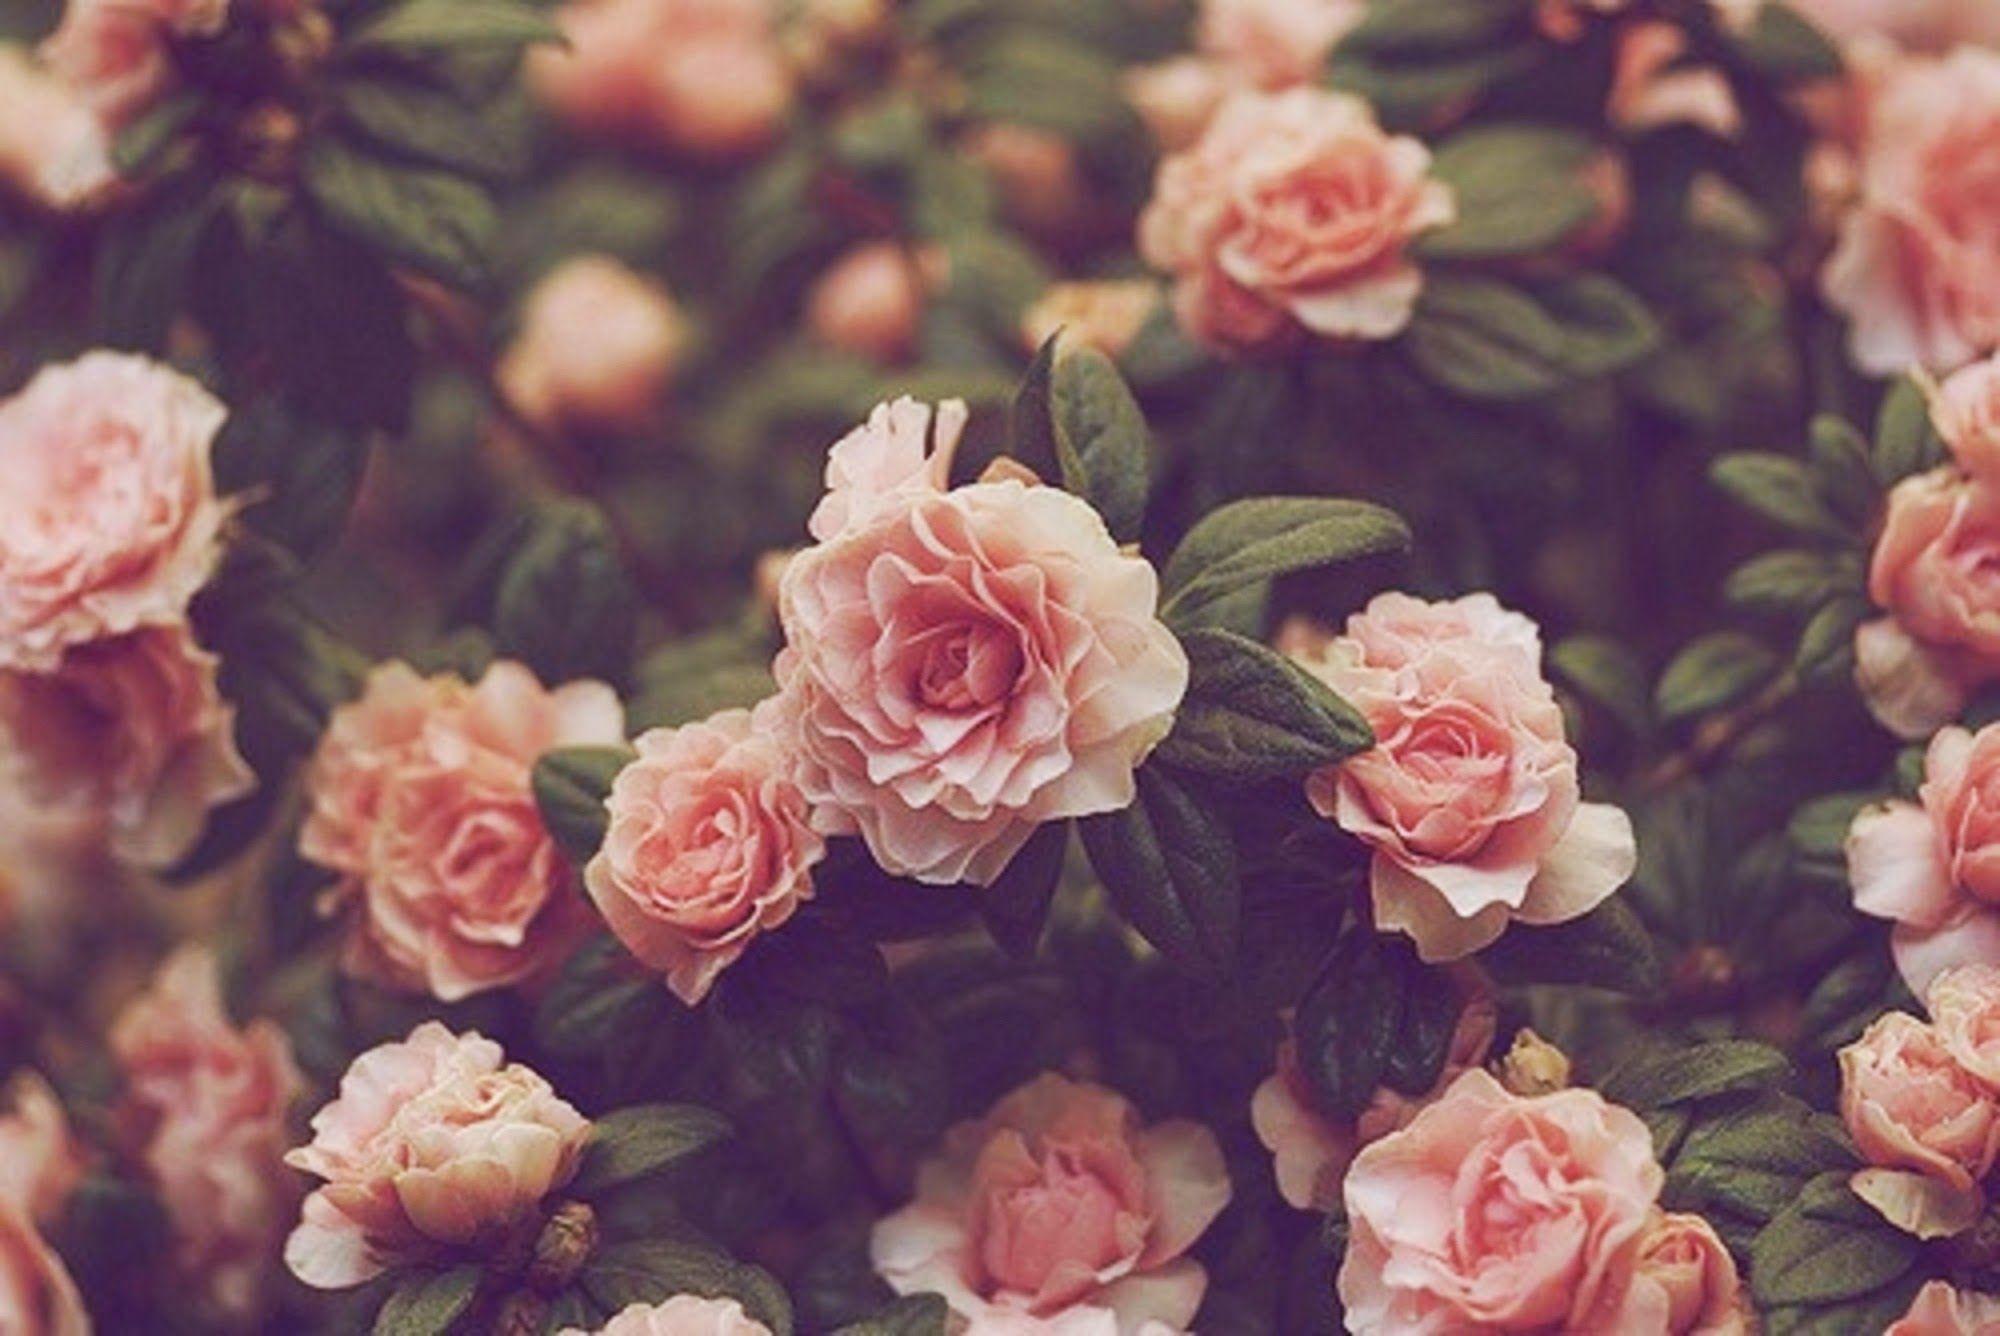 pretty vintage backgrounds for tumblr